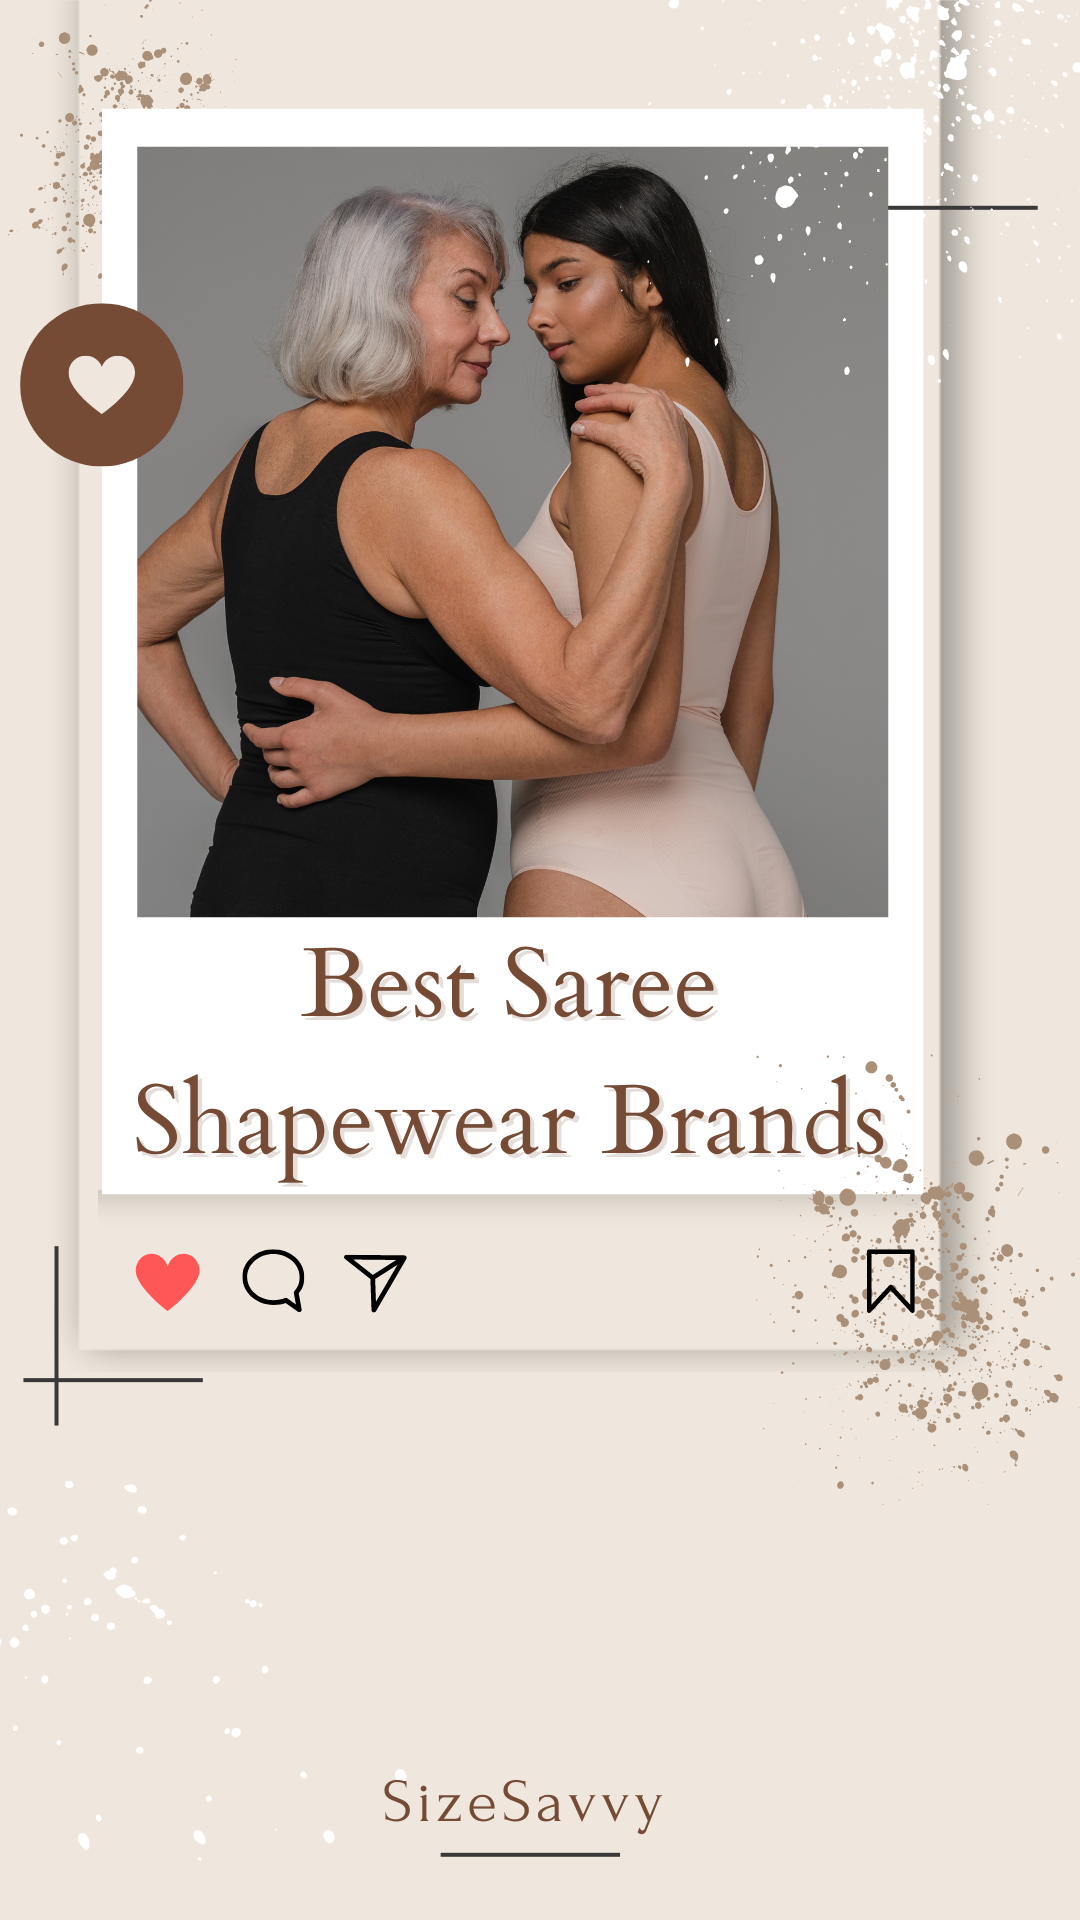 10 Best Saree Shapewear Brands in India: Guide to Flawless Drapes